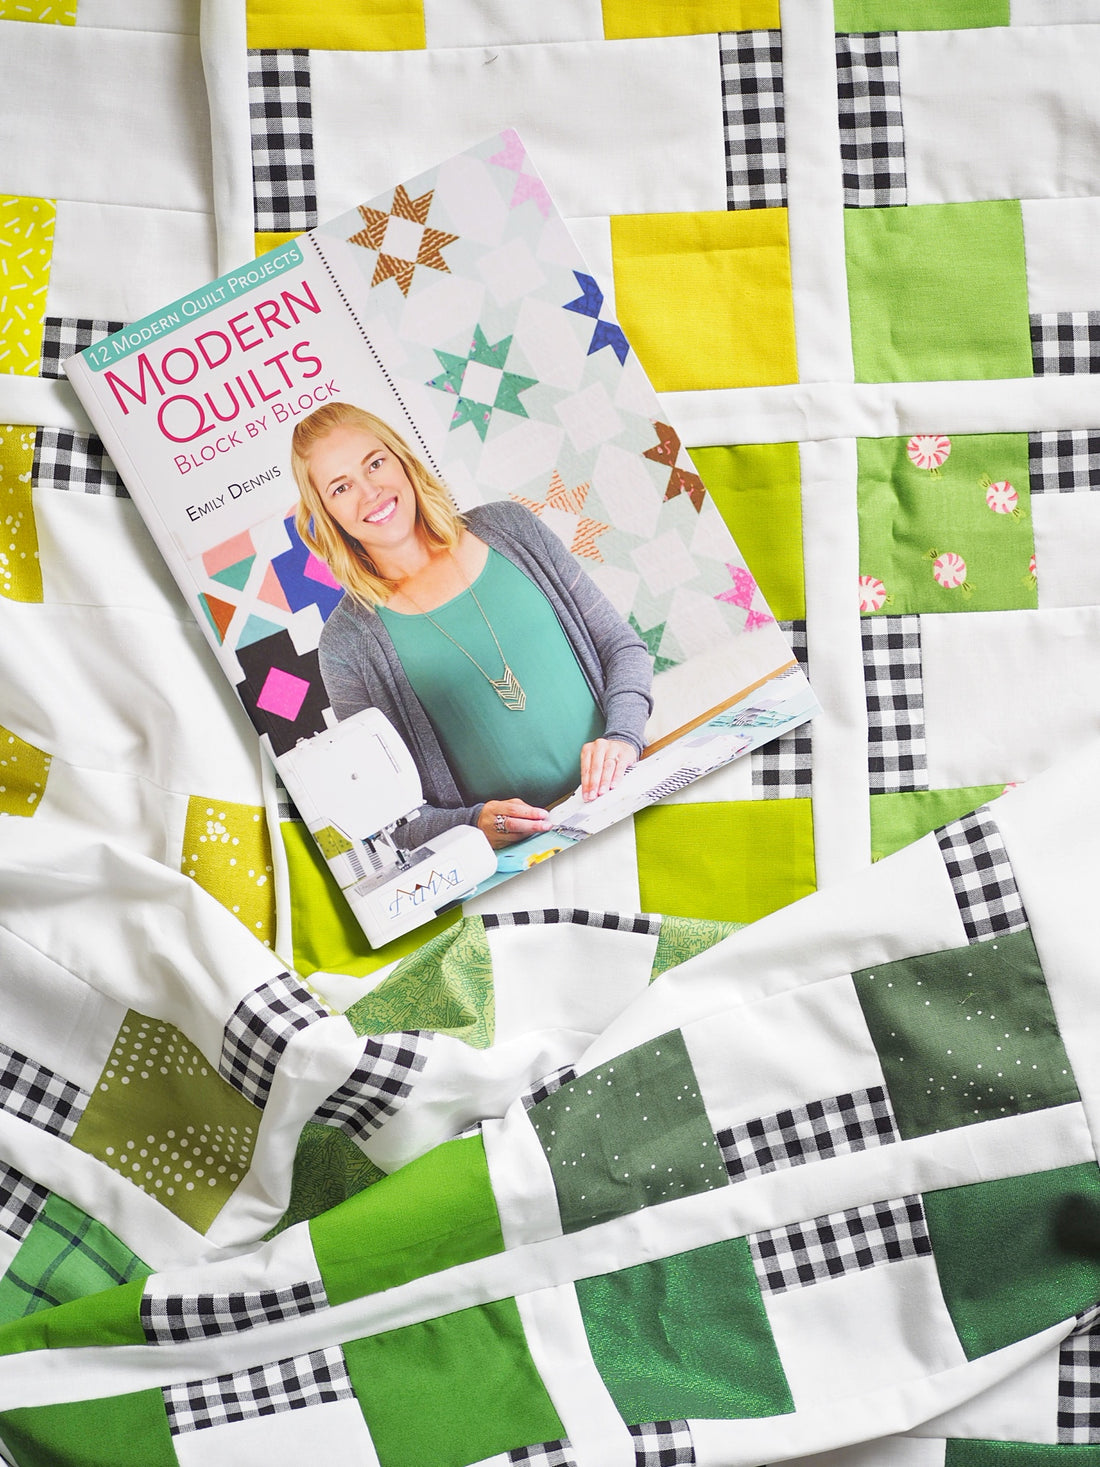 Top 5 Brand New Gifts for Quilters - Diary of a Quilter - a quilt blog